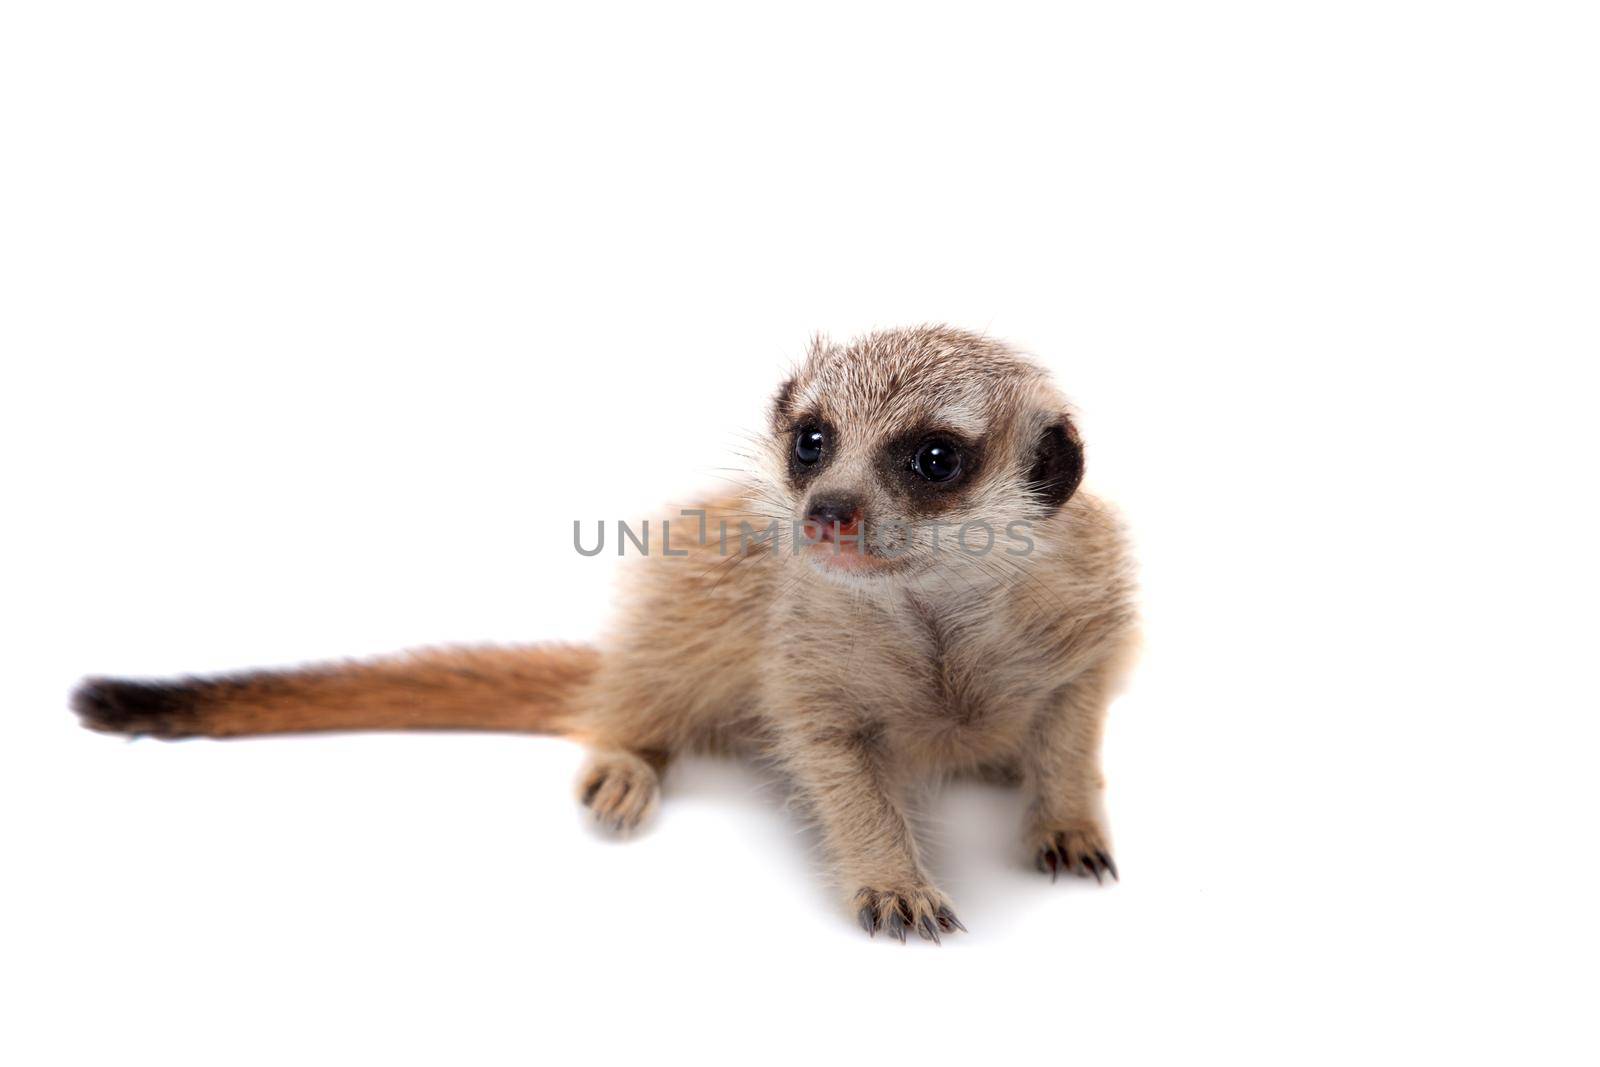 The meerkat or suricate cub, 1 months old, on white by RosaJay